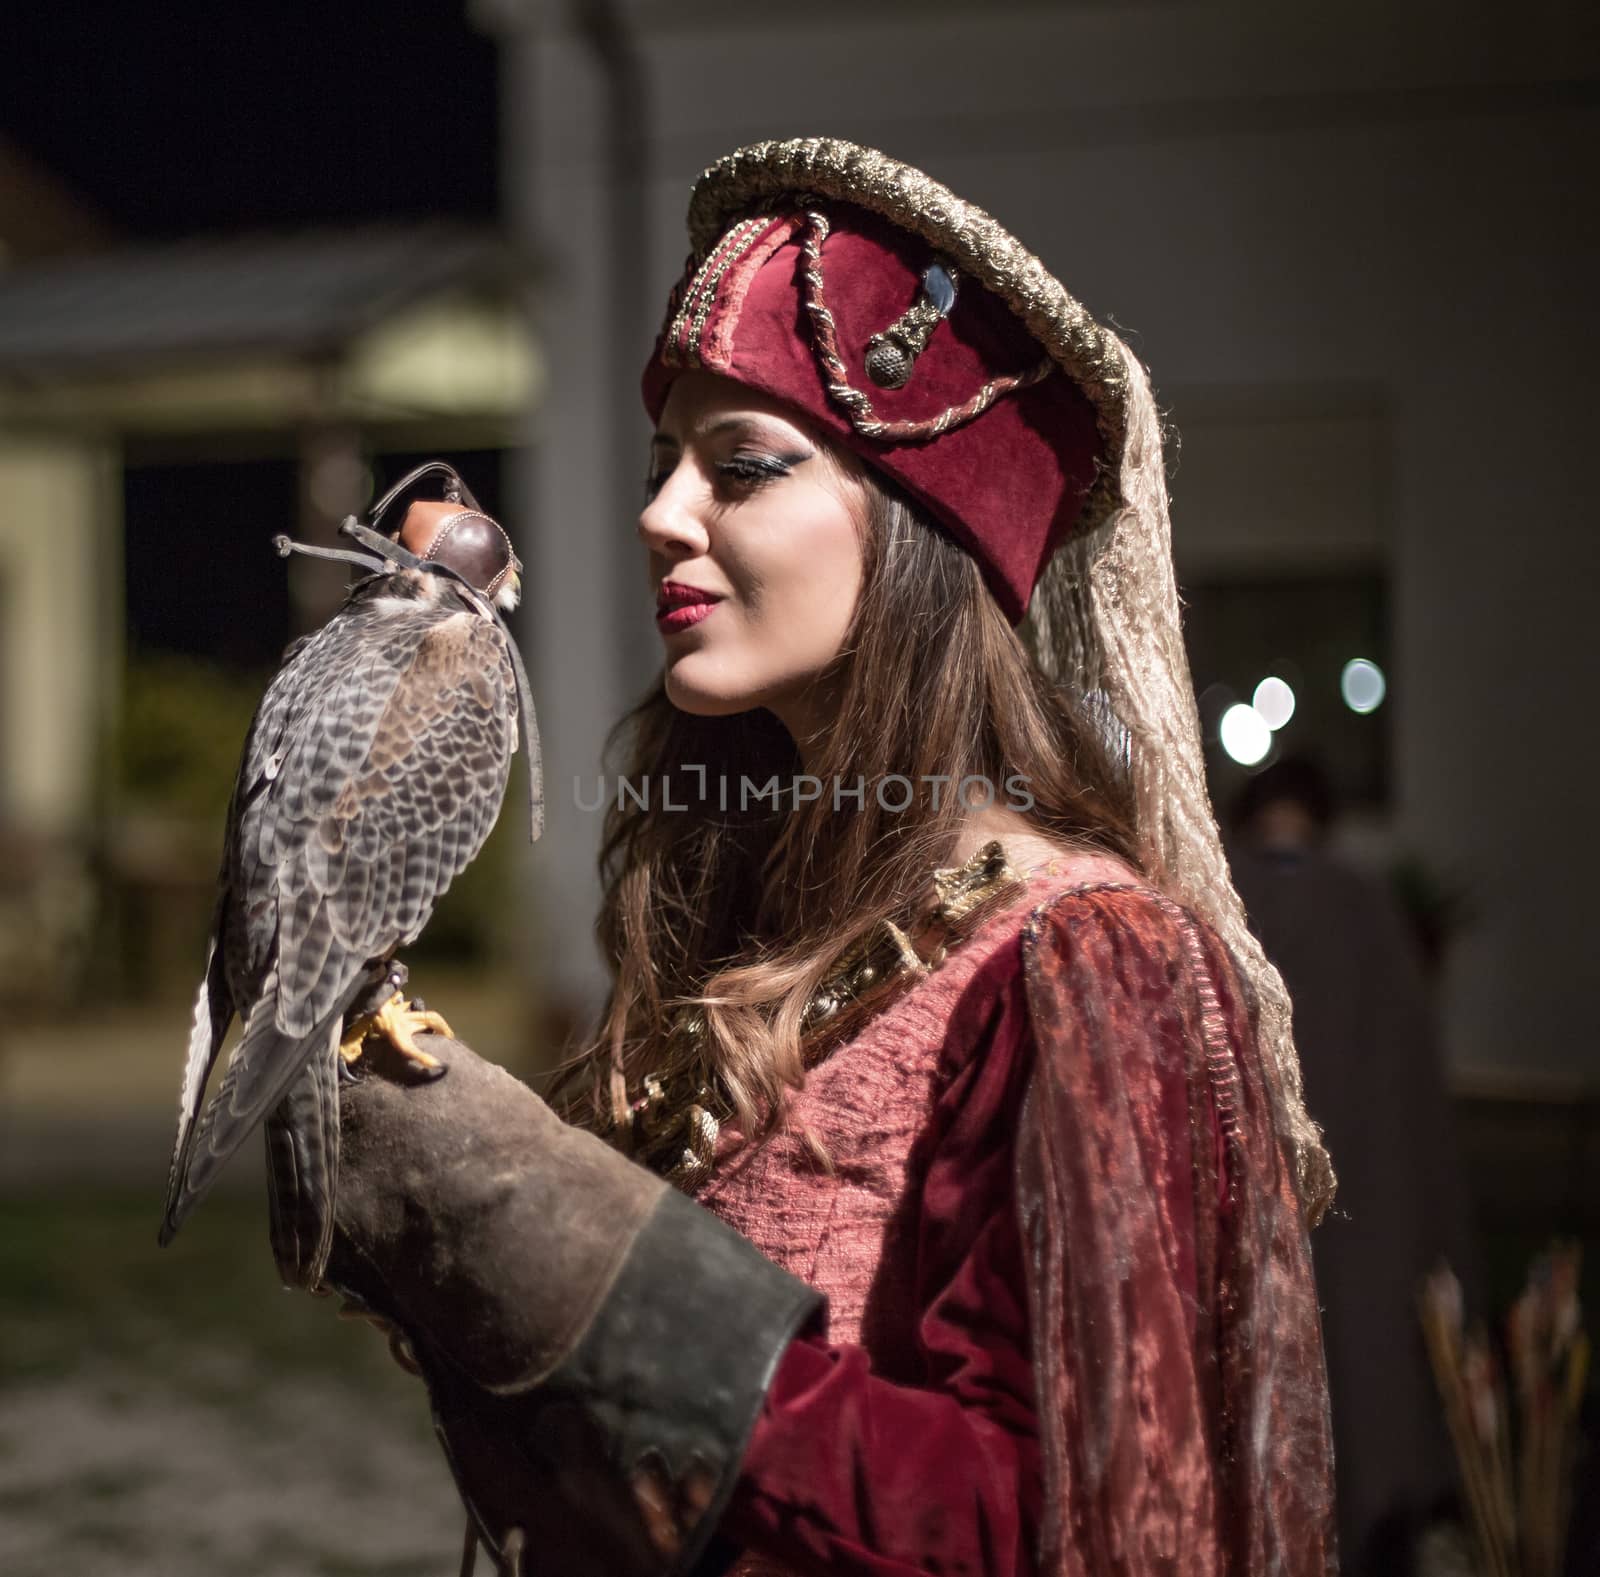 medieval woman holding a falcon on his arm. Lady looks at the hawk